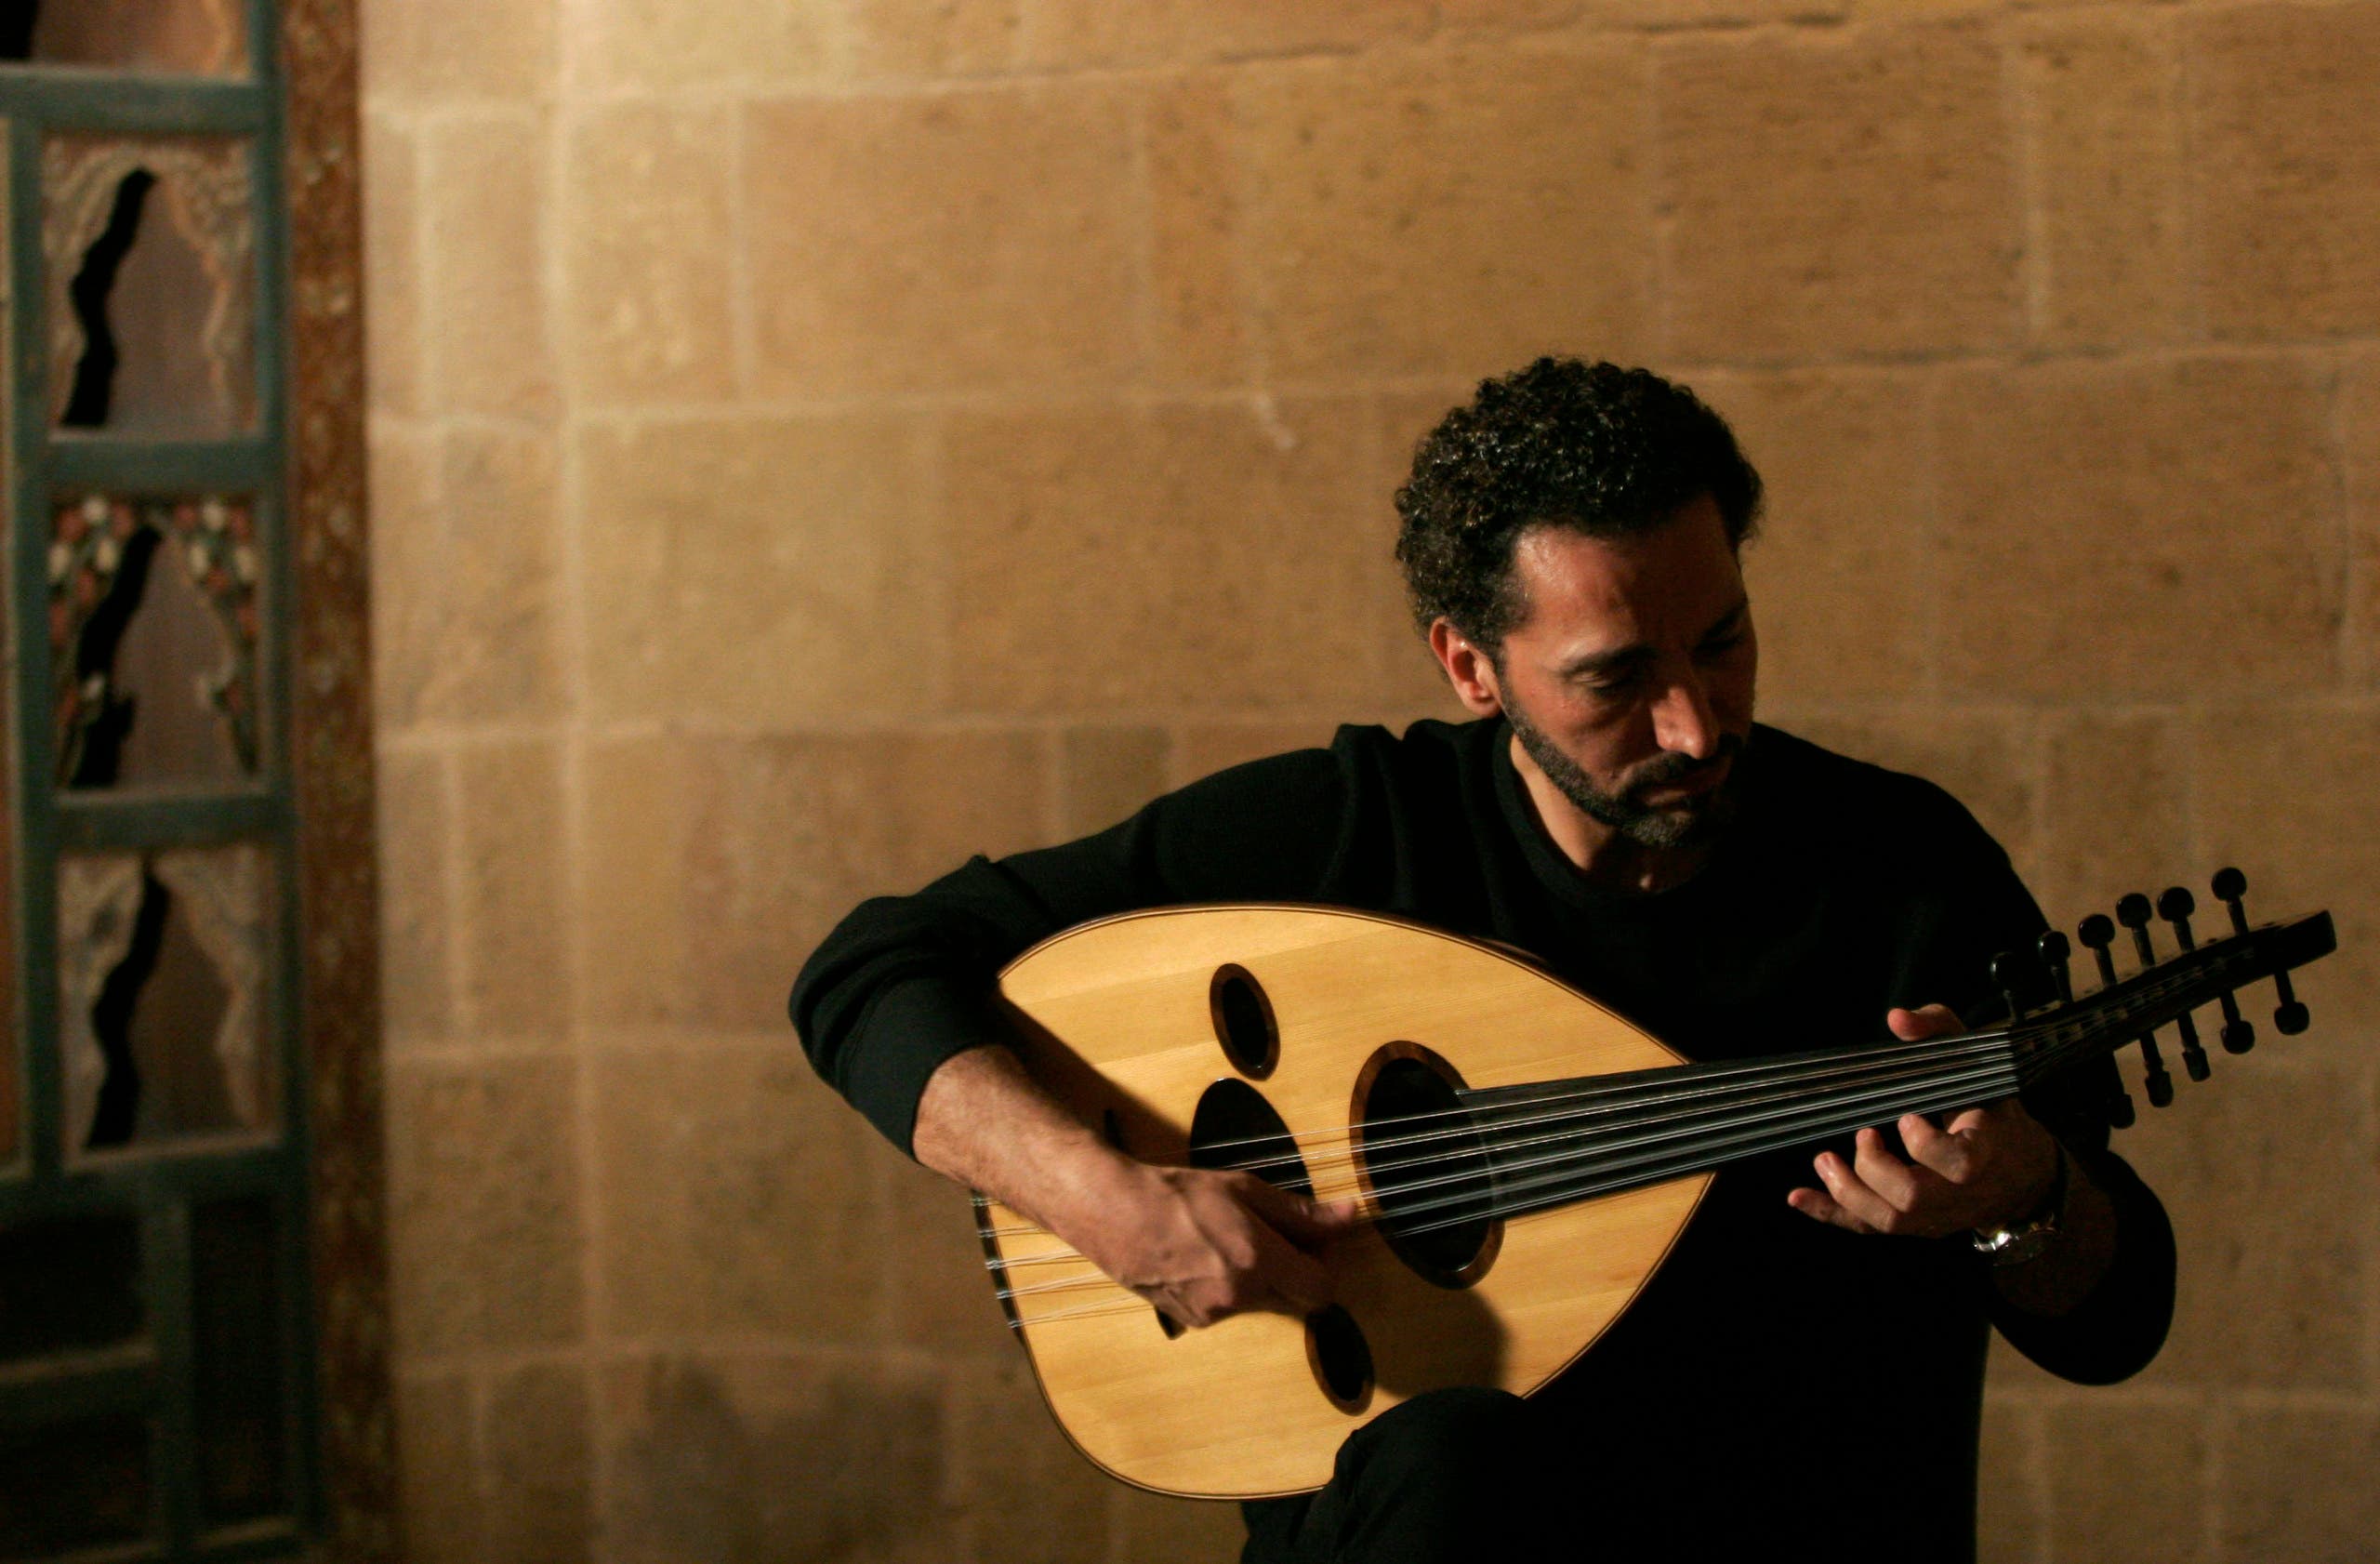 Prominent Iraqi musician Naseer Shamma plays the lute, or oud in Arabic, at the Arab Centre for Oud which he founded at a house built in the 14th century in Cairo this picture taken October 22, 2007. (Reuters)